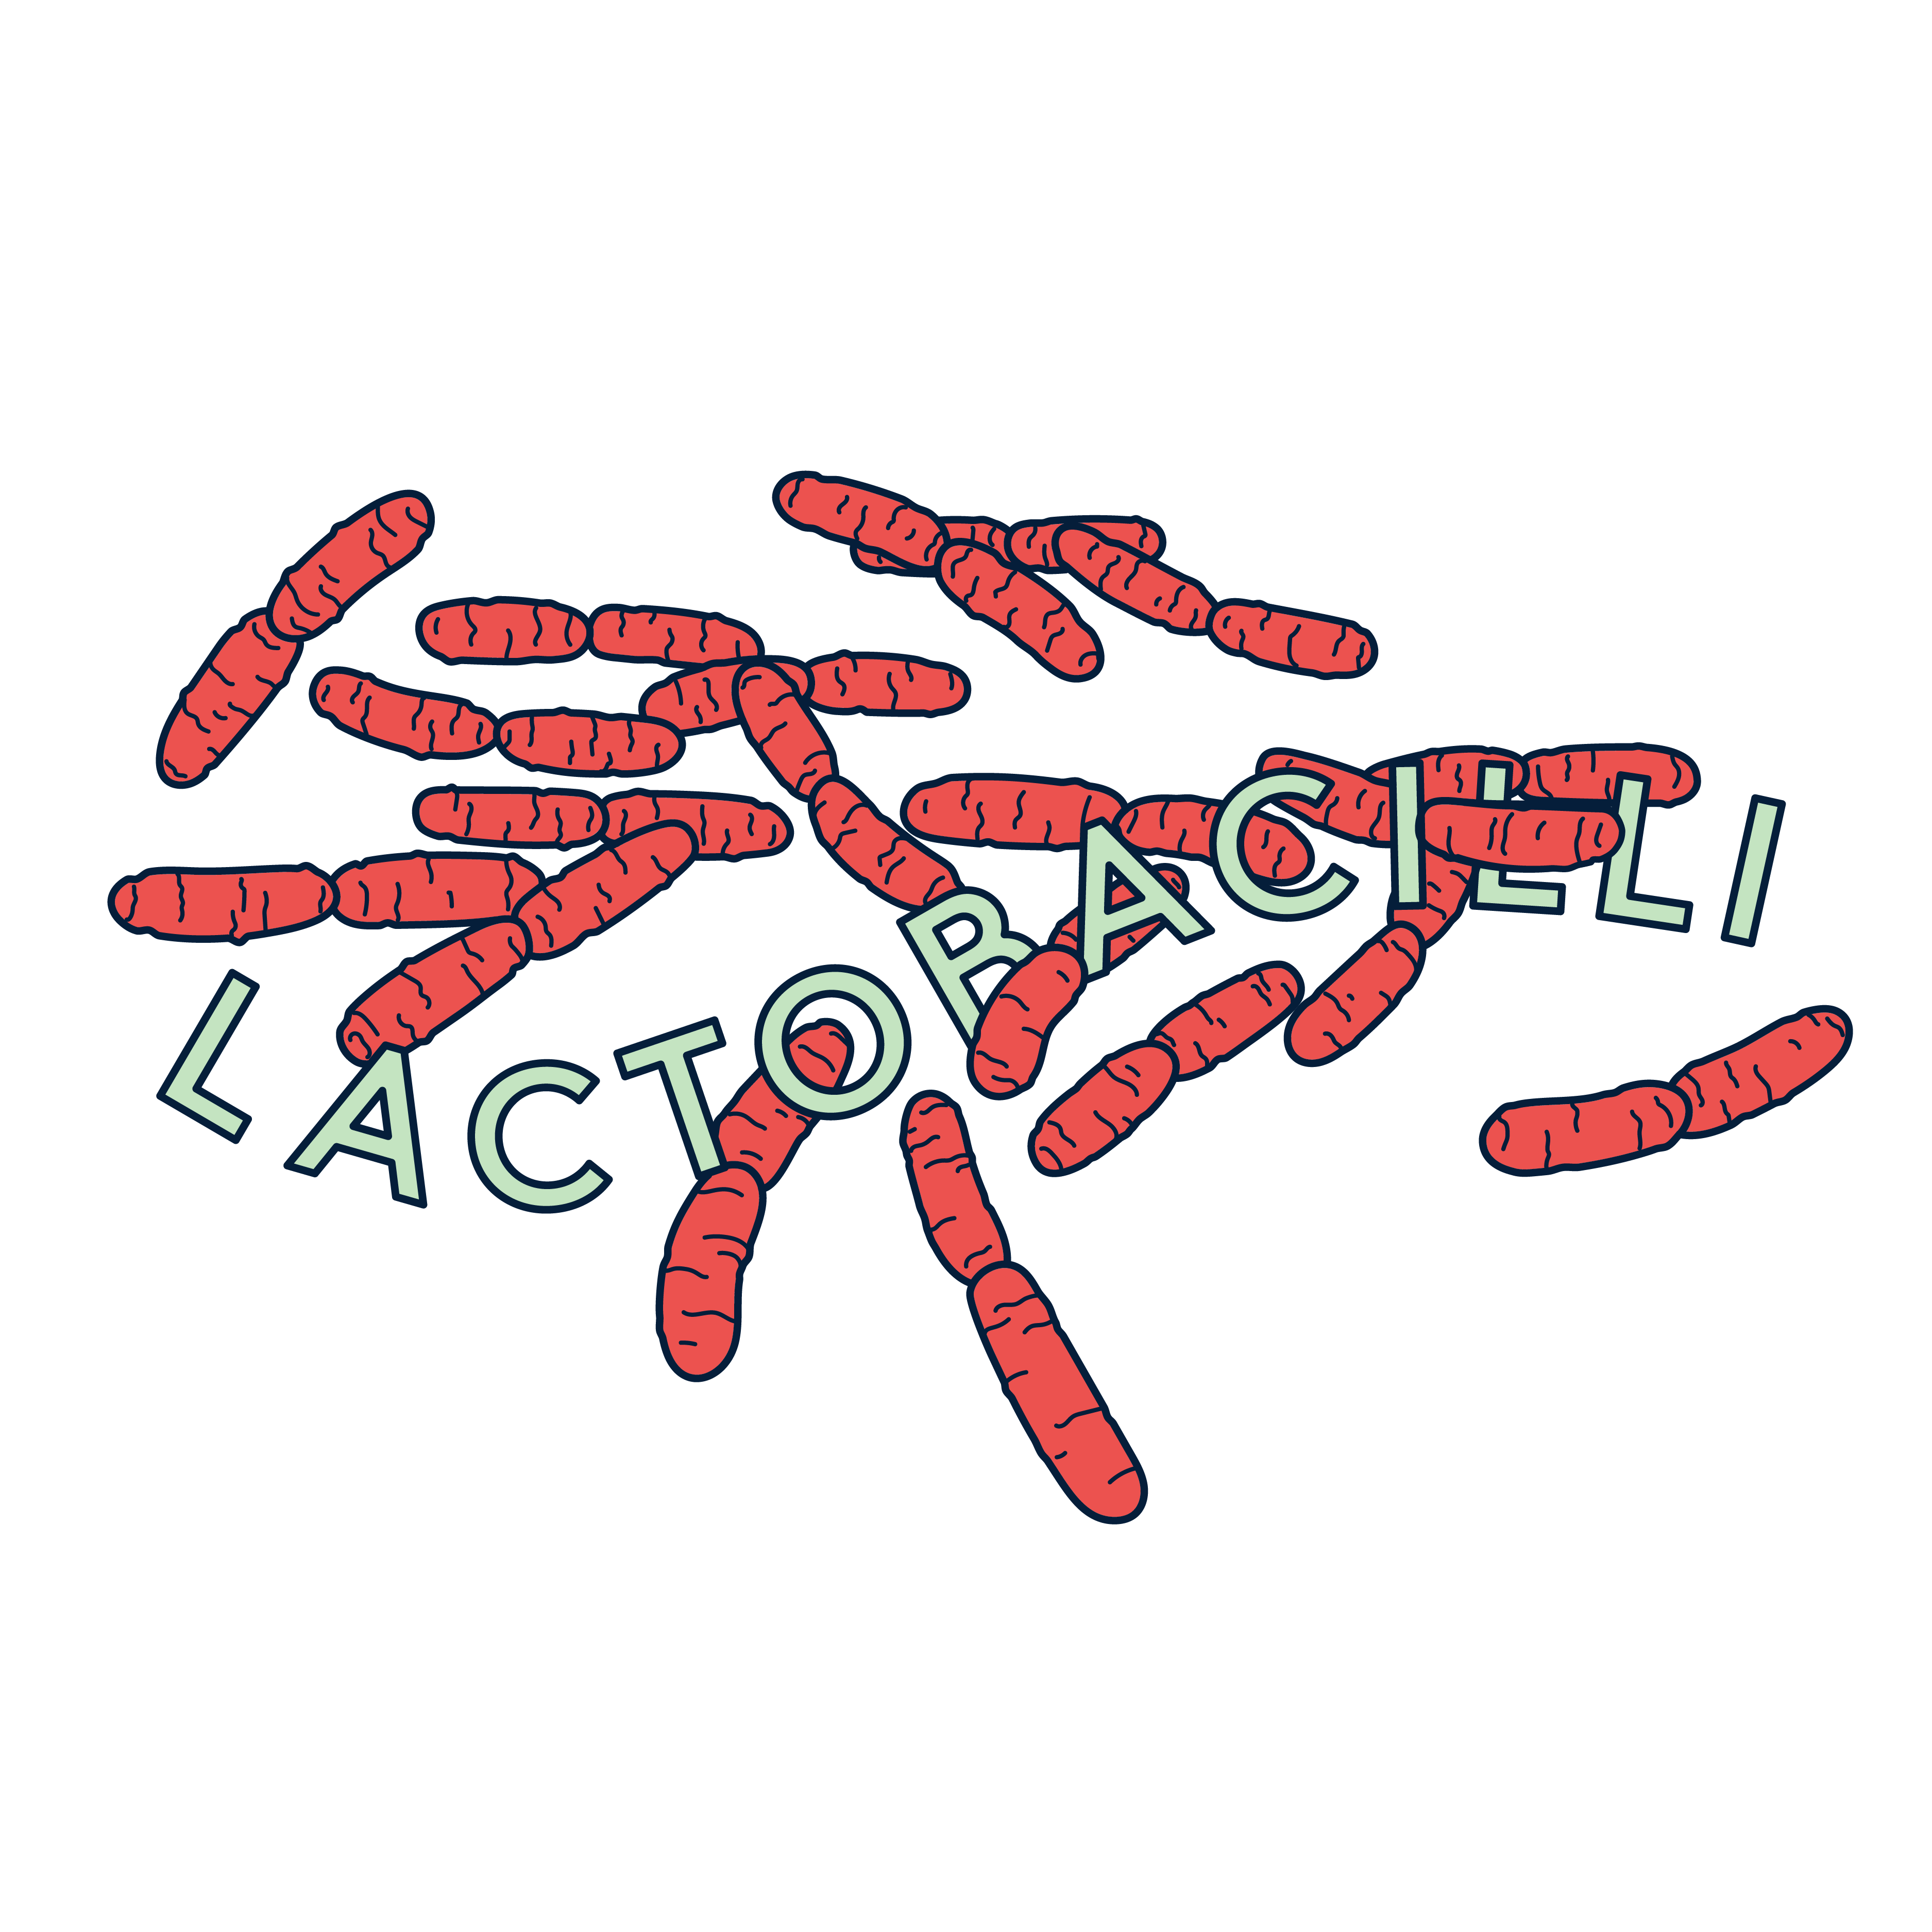 Lactobacilli are the good bacteria in your vaginal microbome, lactobacilli protect you from vaginal infections